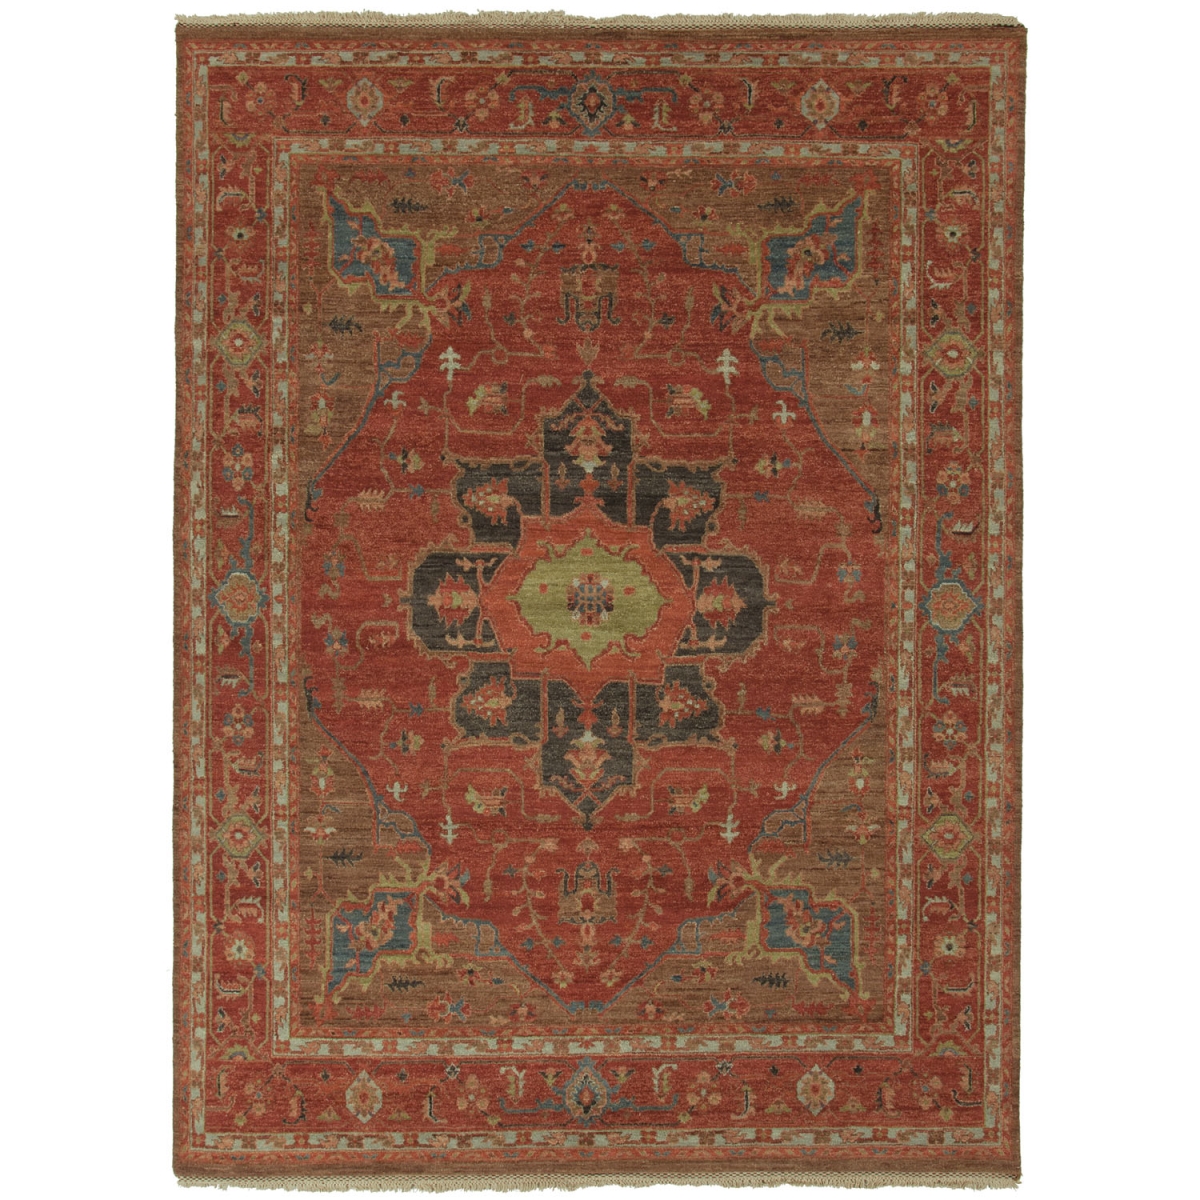 Rug104276 10 X 14 Ft. Uptown Artemis York Hand-knotted Medallion Red & Brown Area Rug